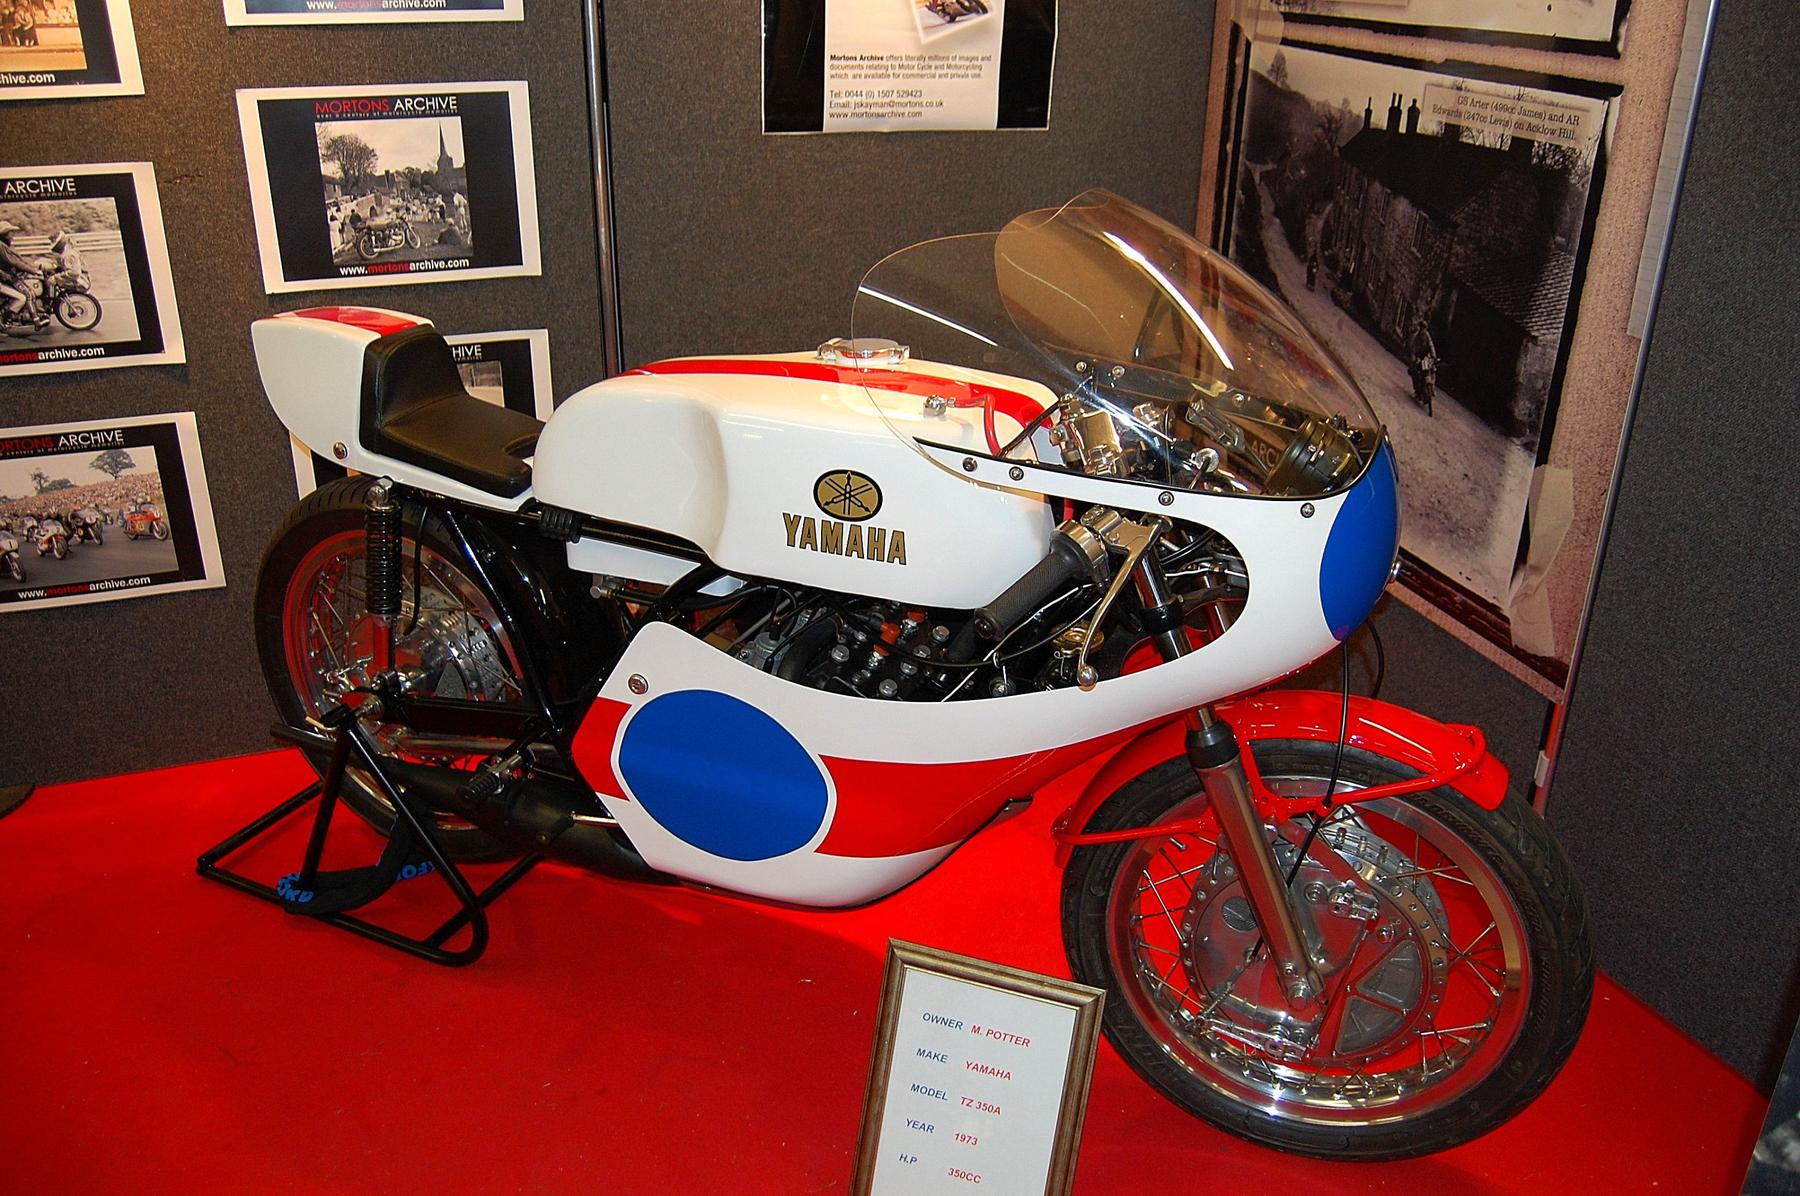 a motorcycle is parked in a museum - File:Flickr - ronsaunders47 - YAMAHA TZ 350A. 350cc GRAND PRIX